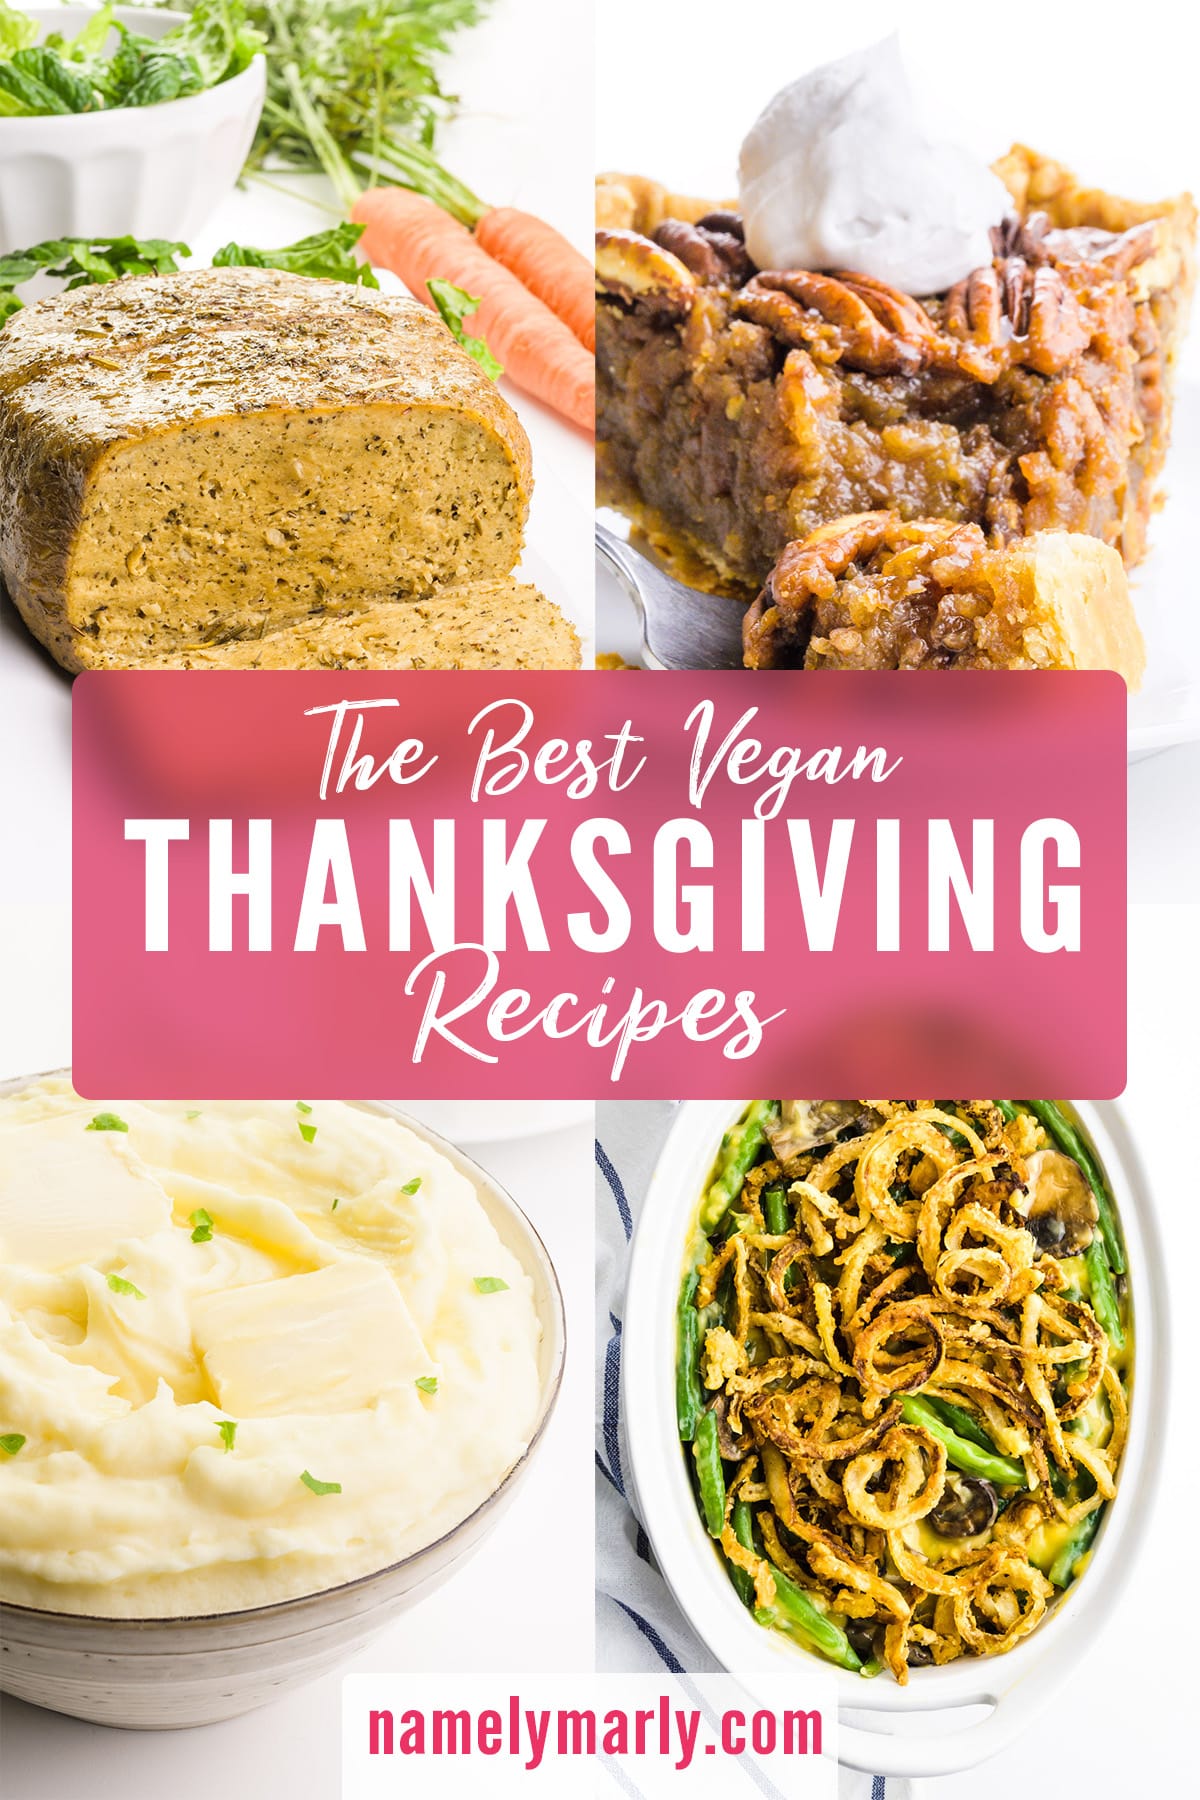 A collage of four images shows different dishes, like vegan turkey, pumpkin pie, and more. The text box in the middle reads, The Best Vegan Thanksgiving Recipes.